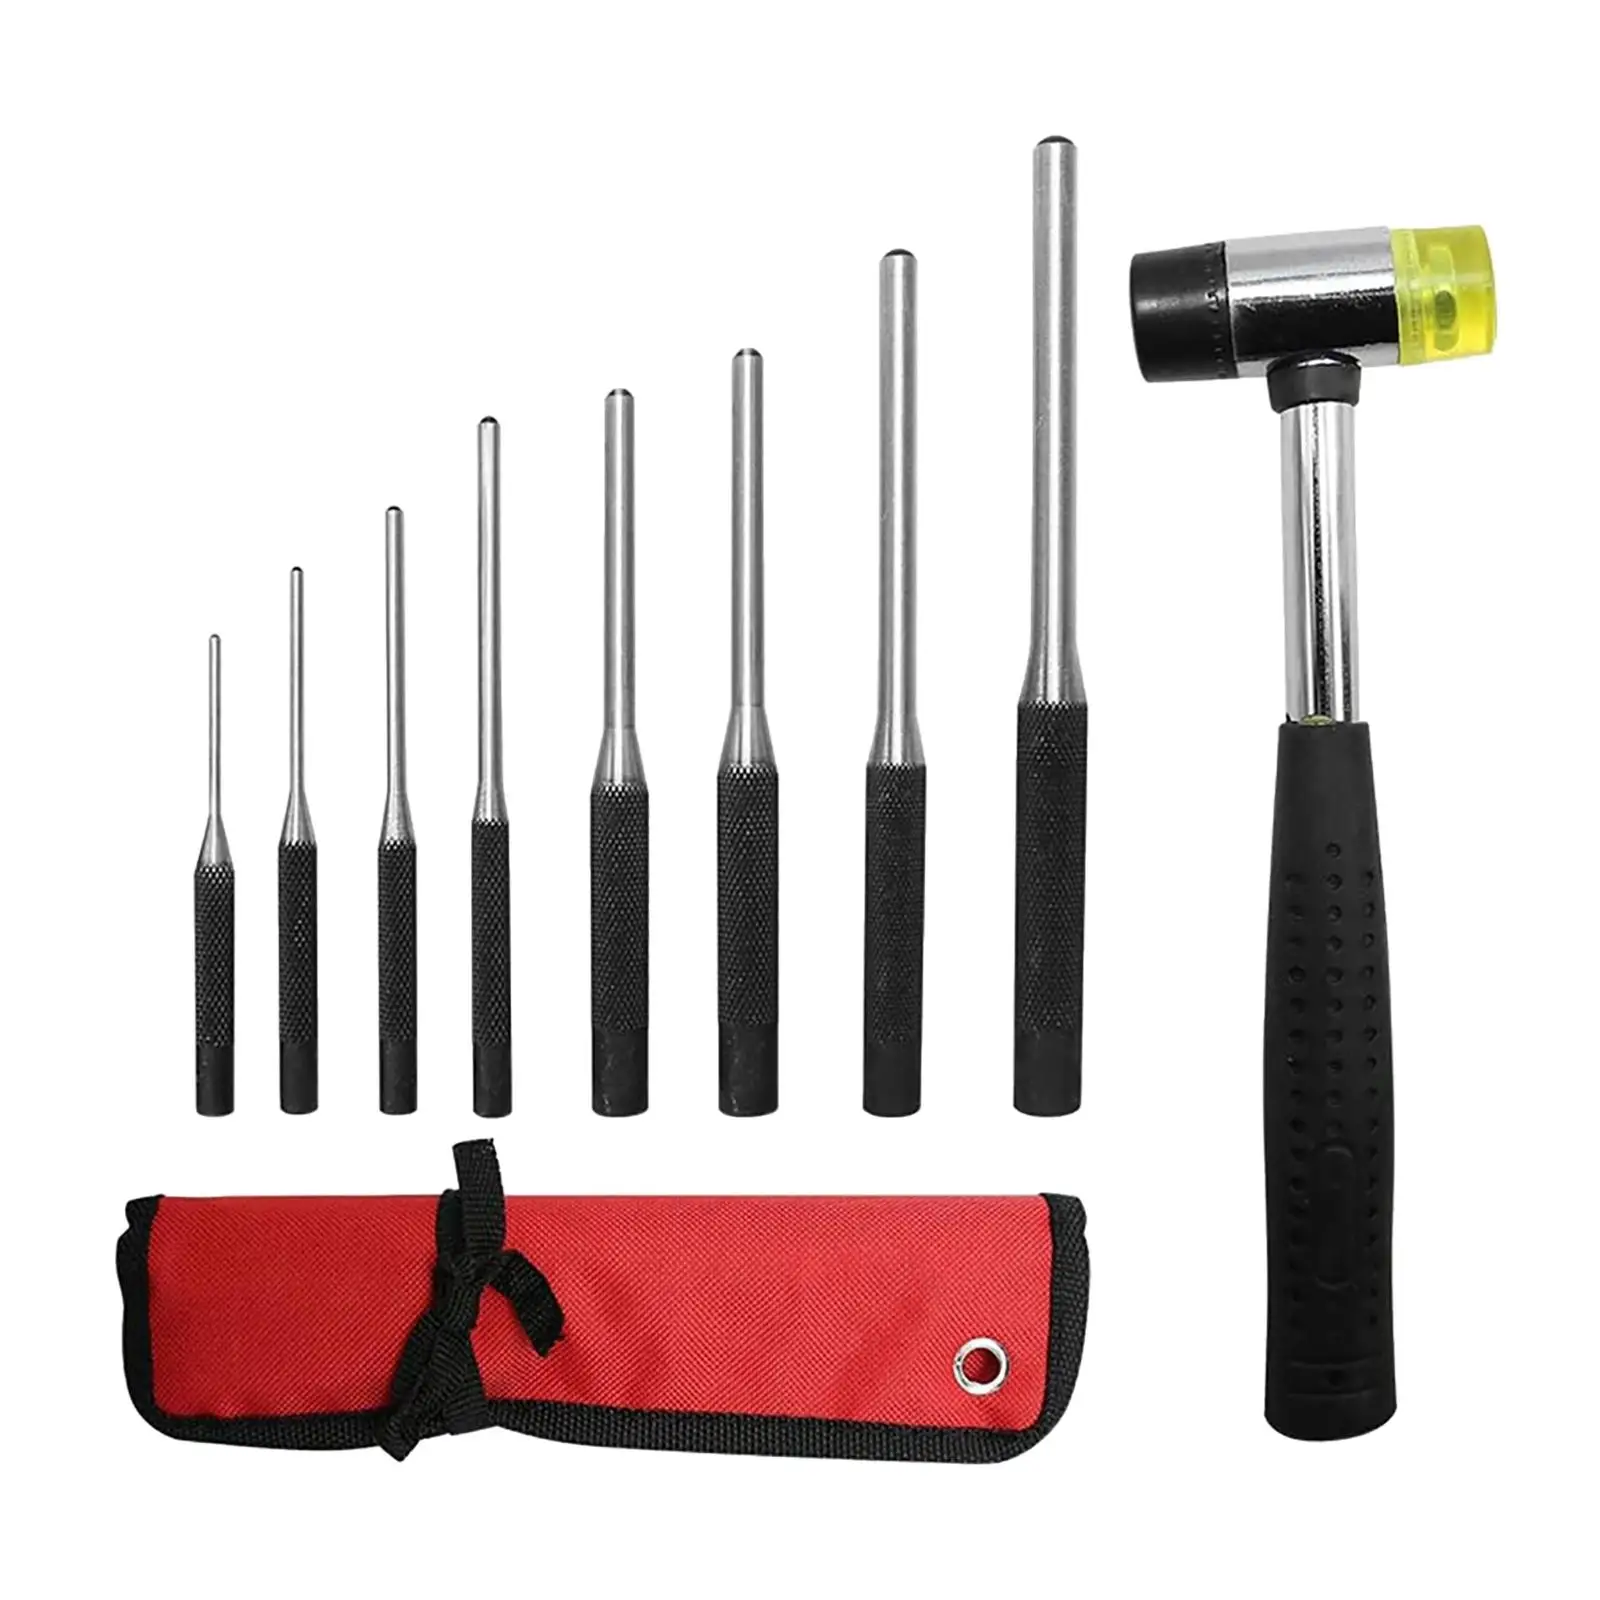 9 Pieces Heavy Duty Roll Pin Punch Set Double-Sided Hammer with Holder...